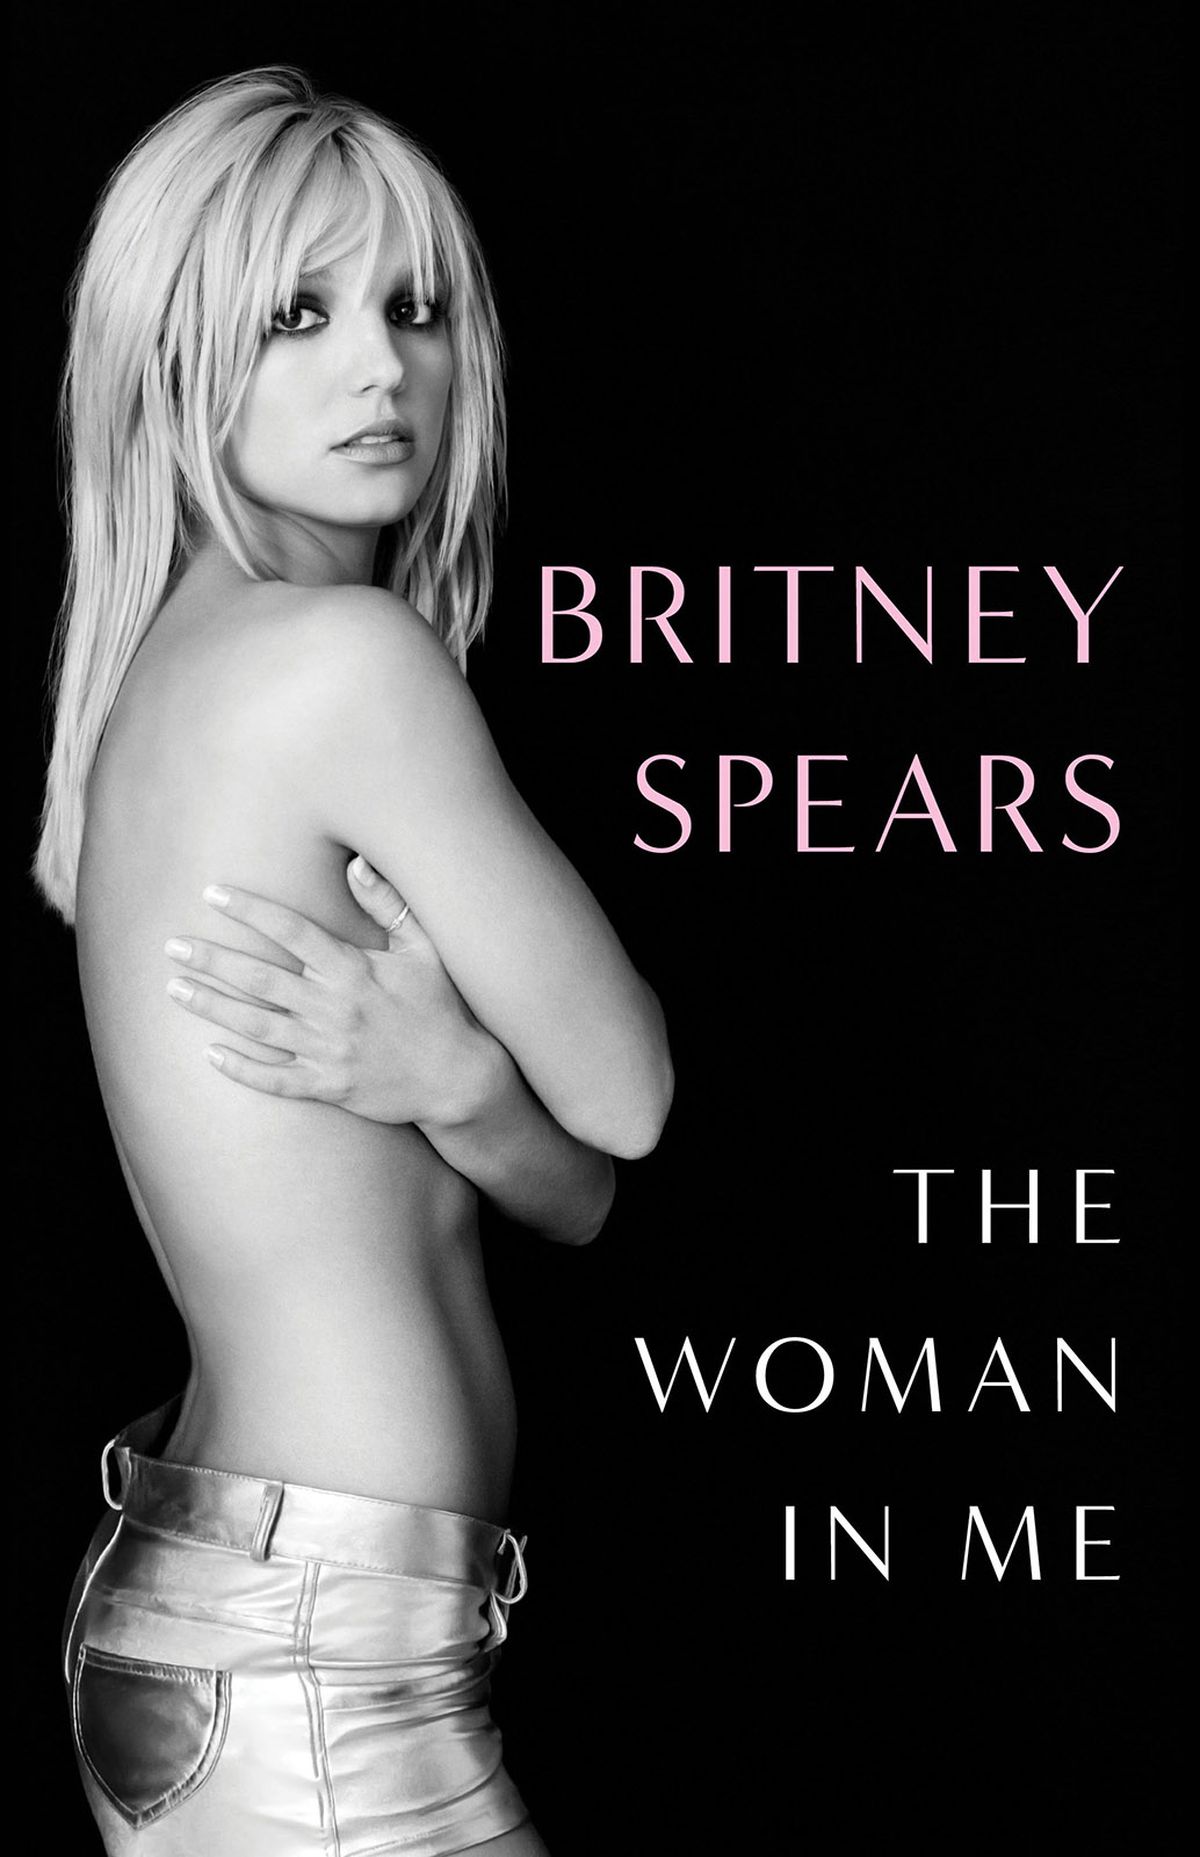 "The Woman in Me" by Britney Spears. (Gallery Books/TNS)  (Gallery Books/Gallery Books/TNS)